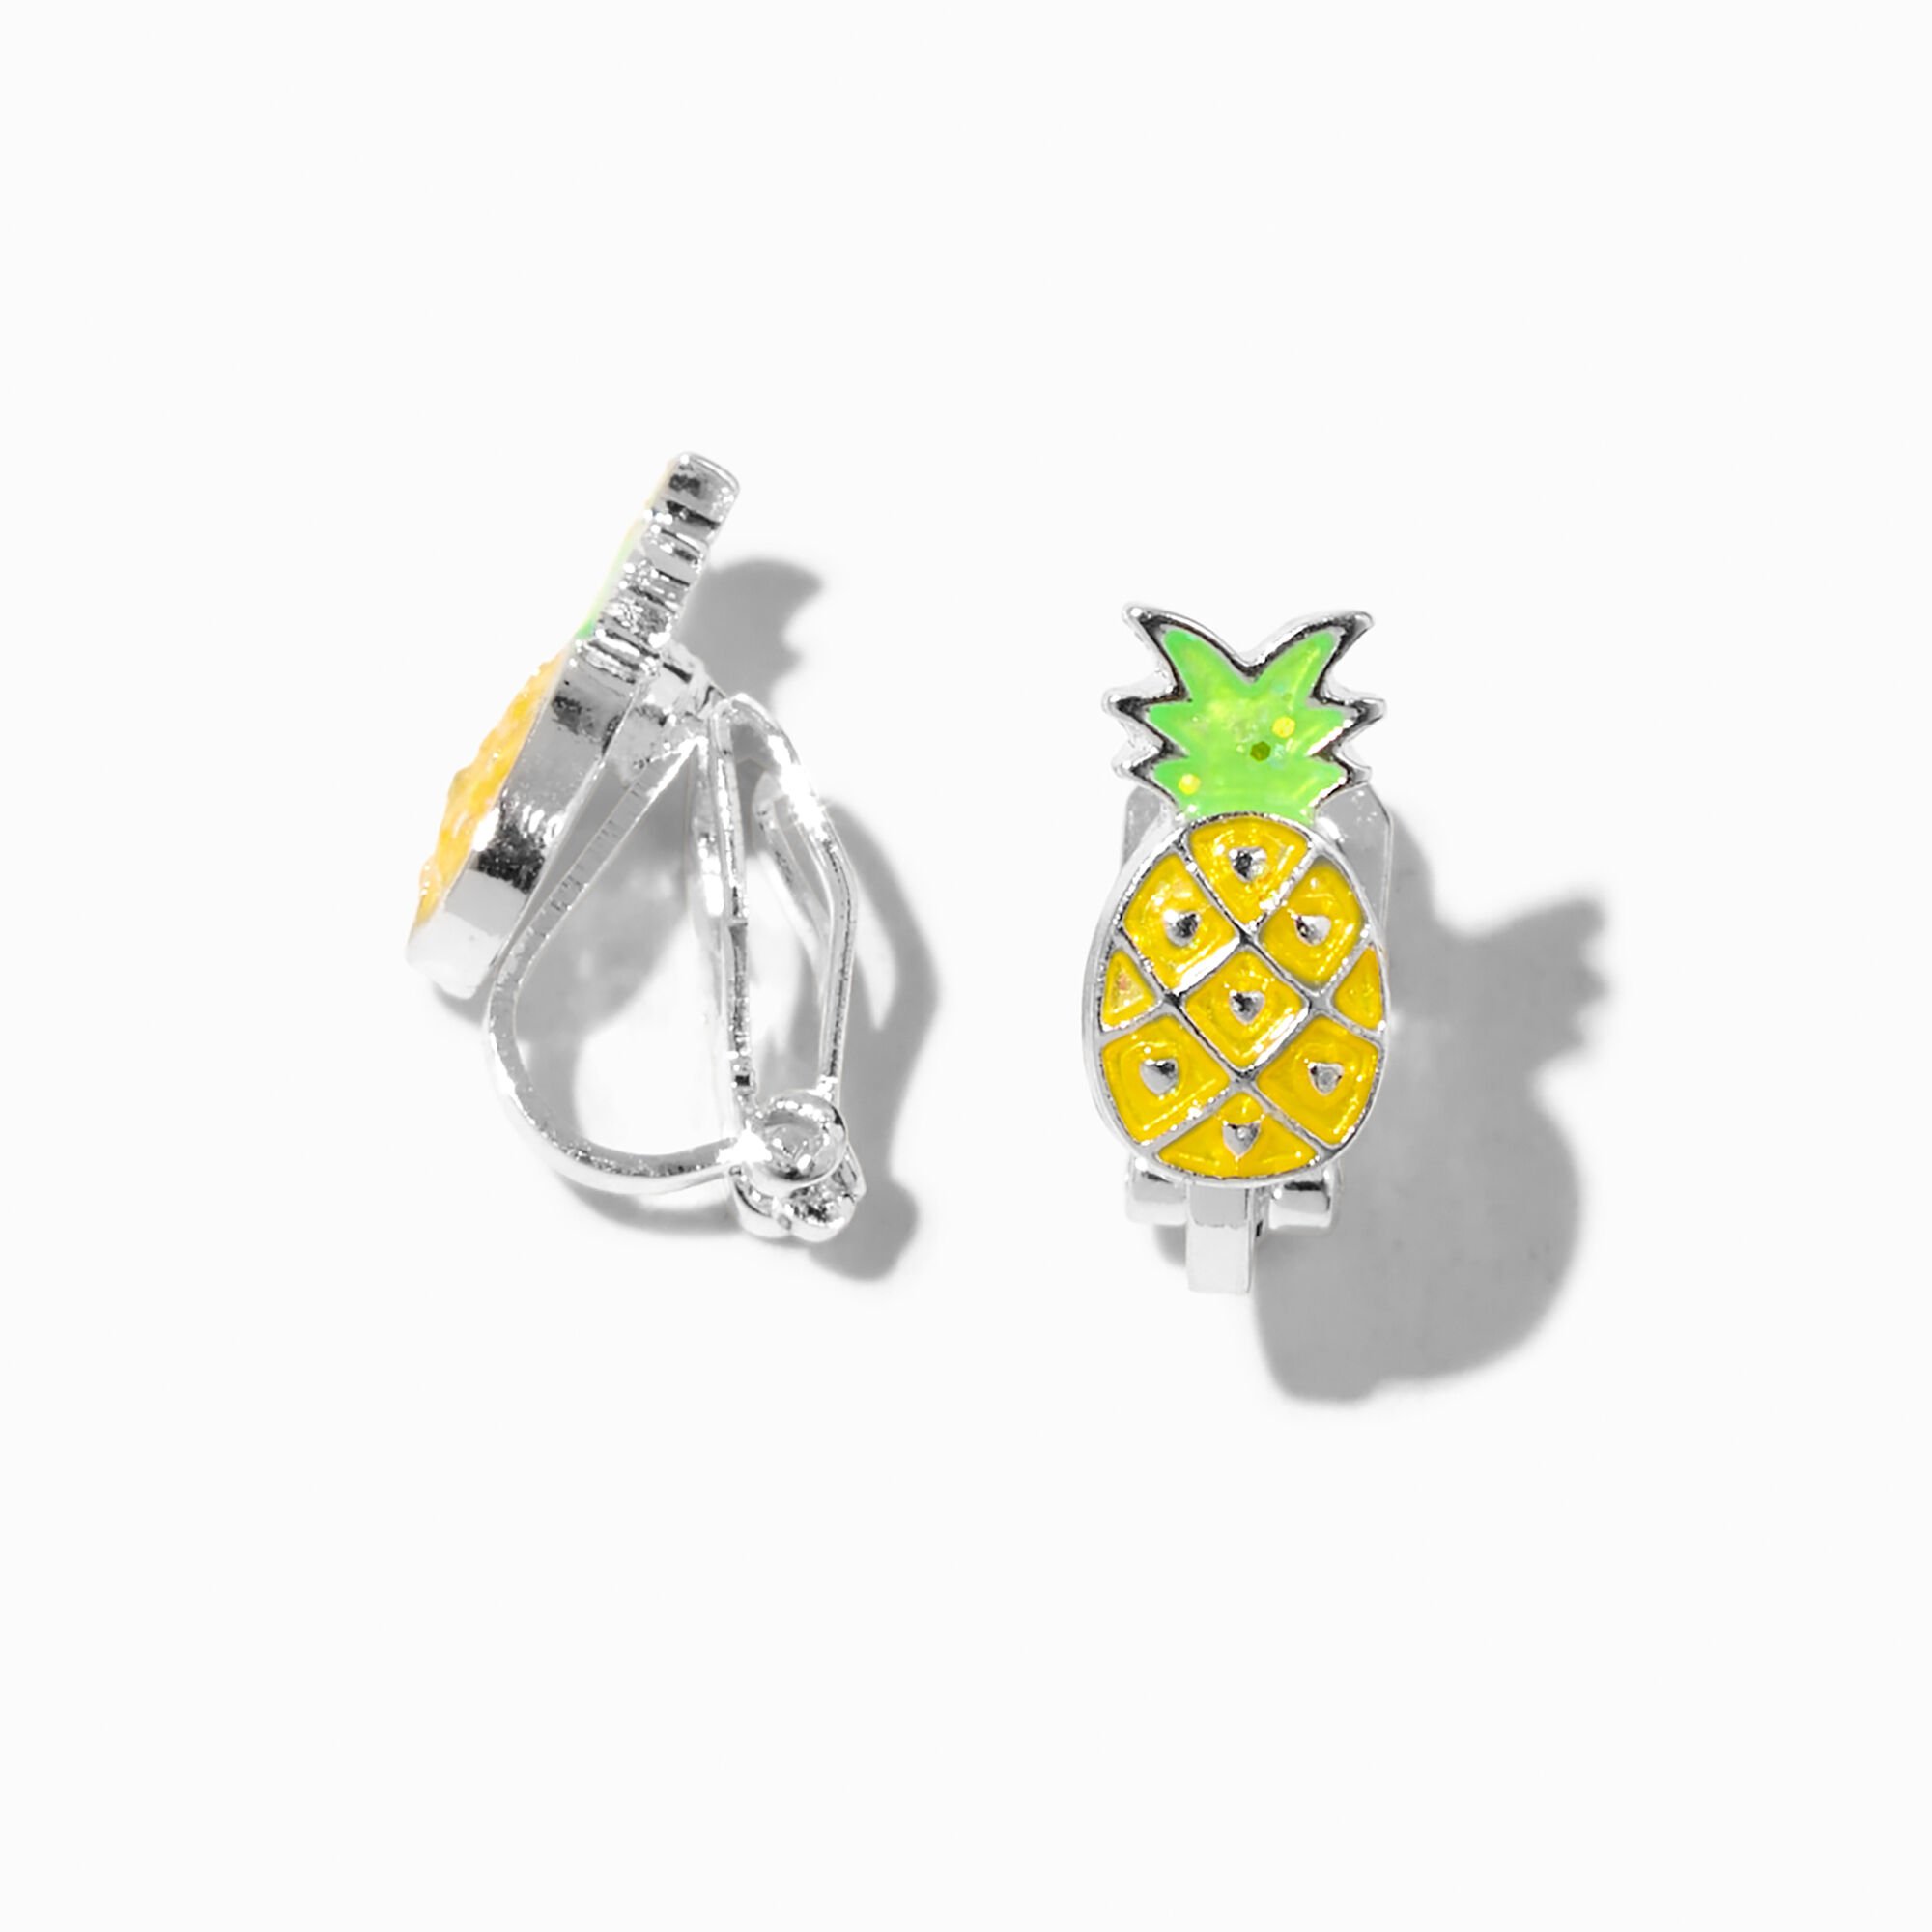 View Claires Tone Glow In The Dark Pineapple Clip On Stud Earrings Silver information